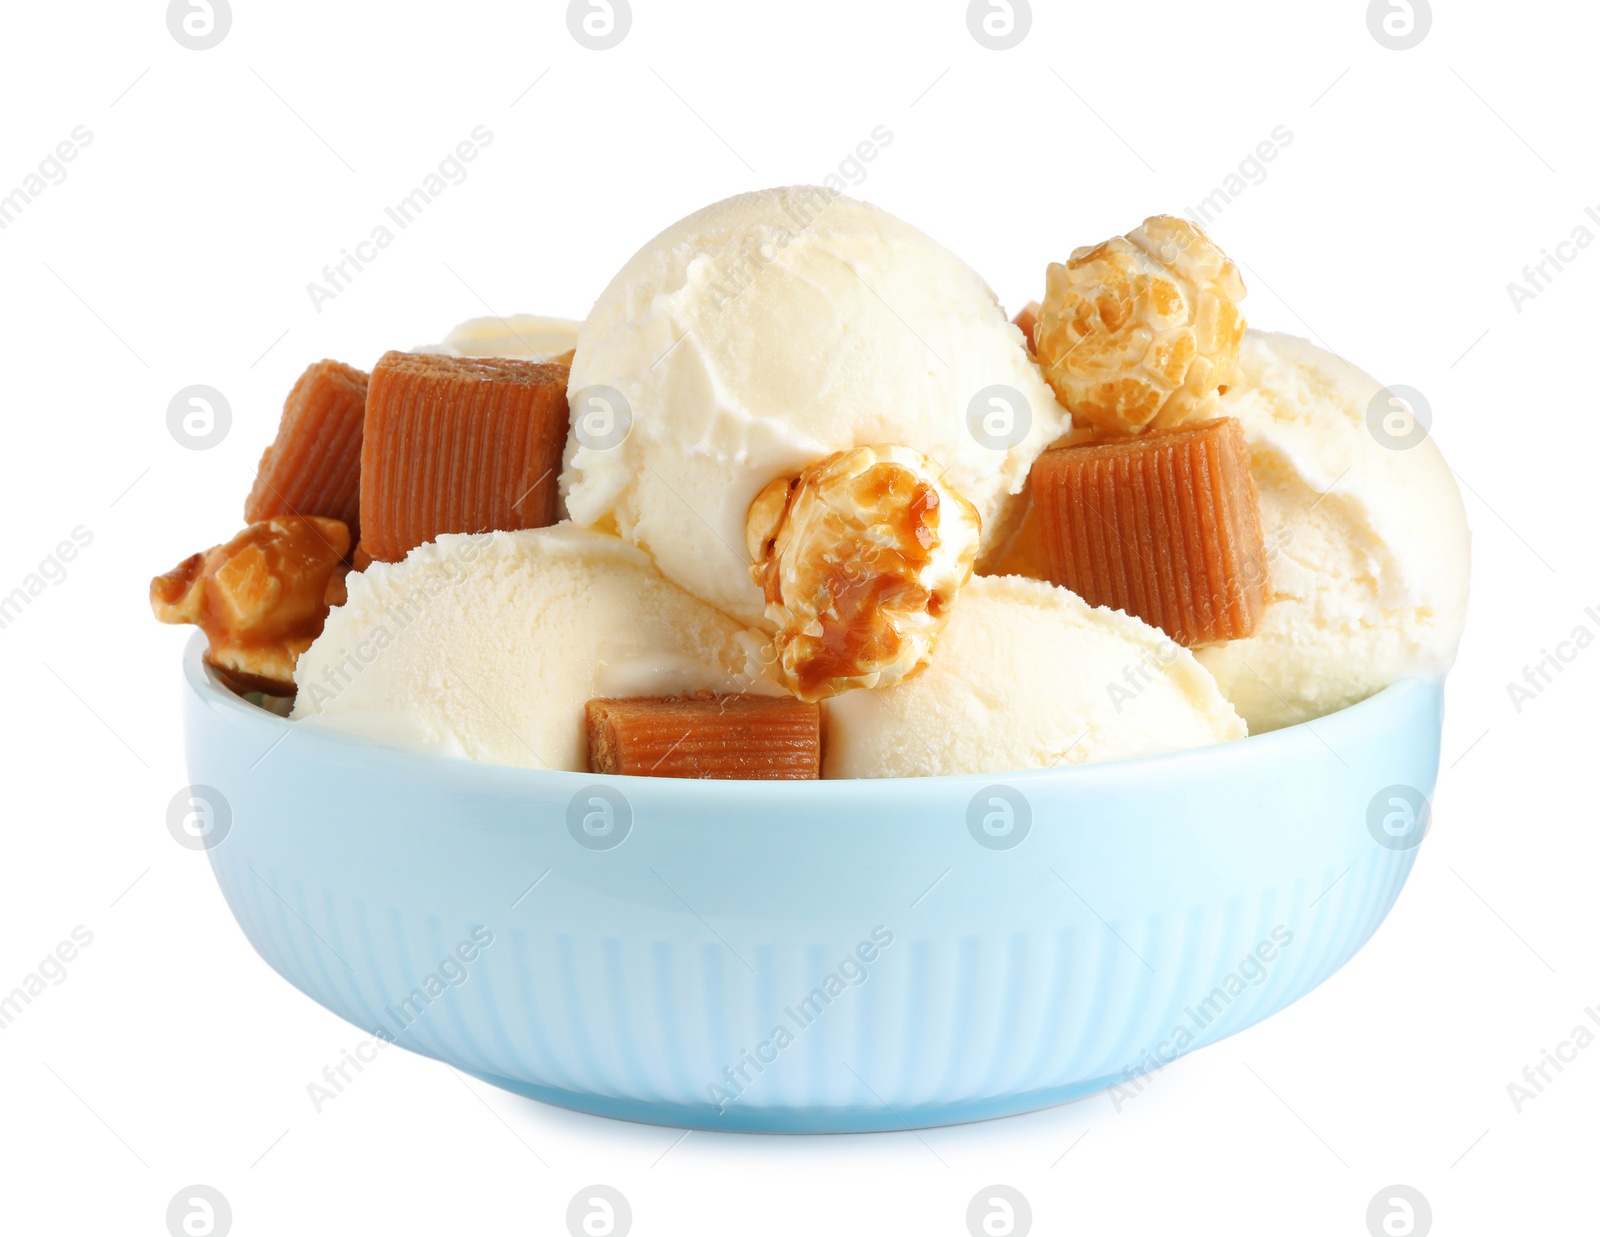 Photo of Plate of delicious ice cream with caramel candies and popcorn on white background